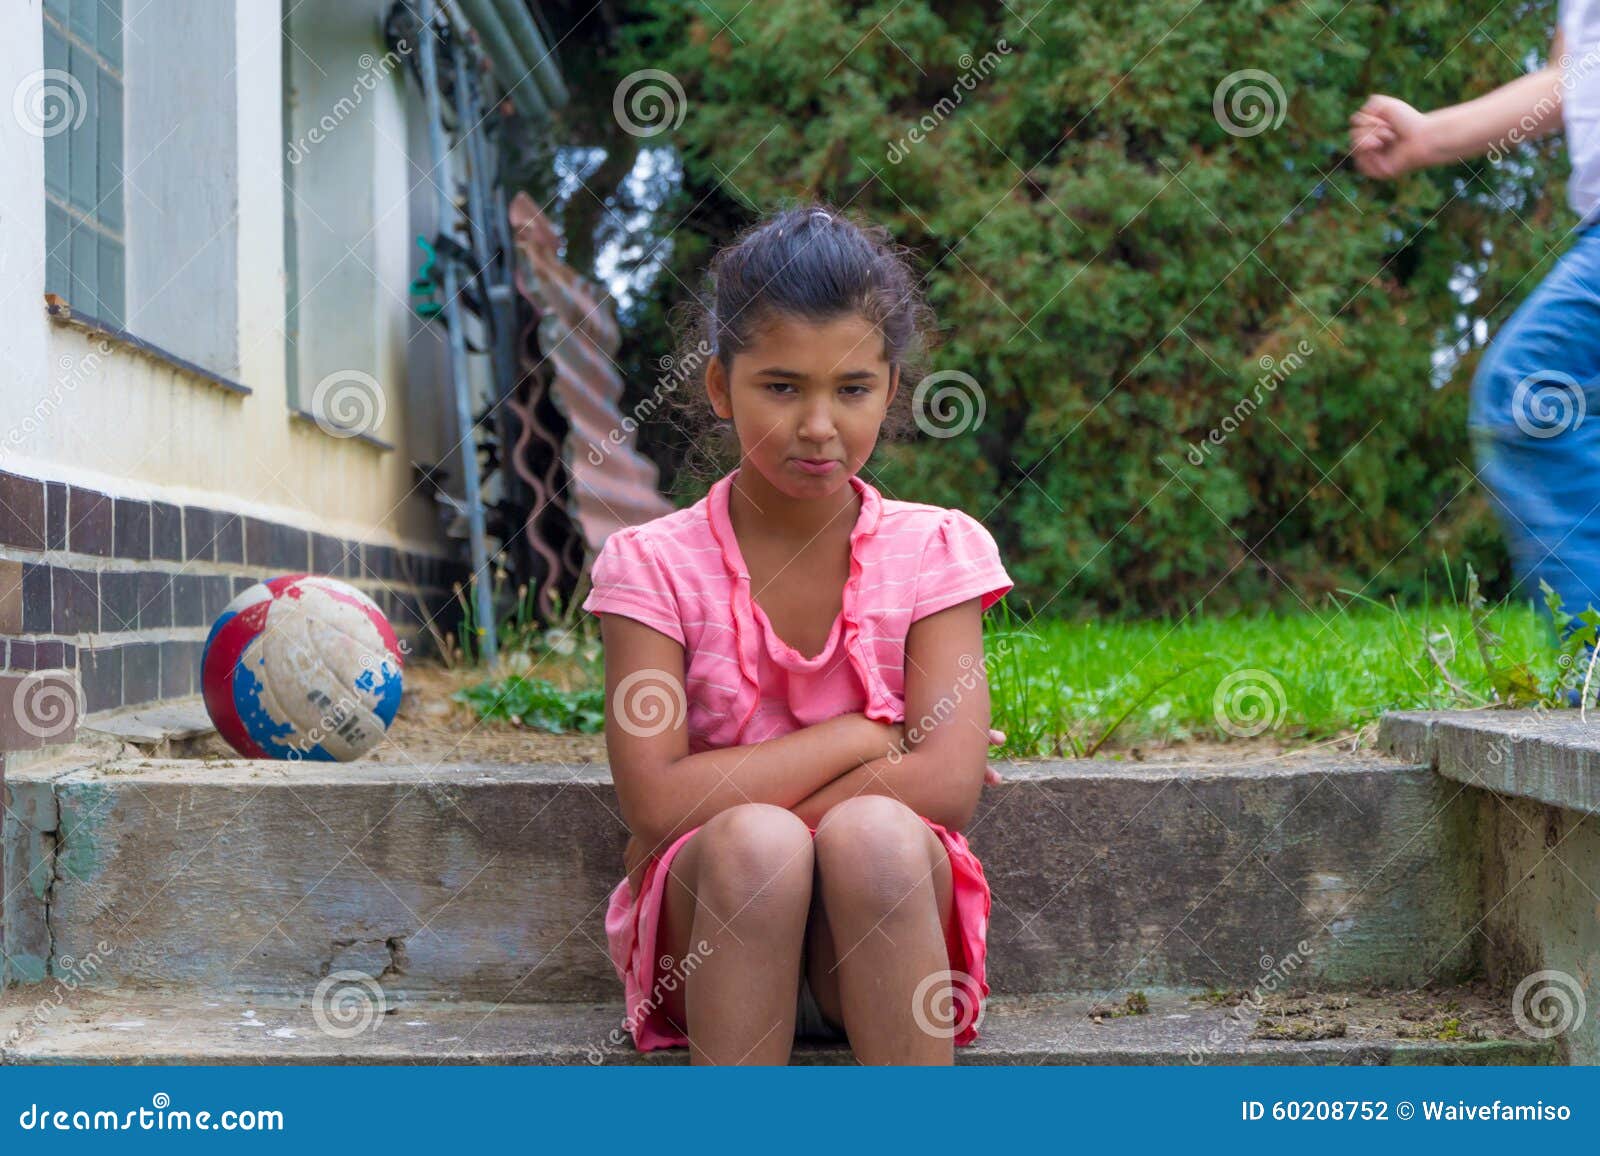 Upset Child Gypsy Girl Don't Want To Play With Other Children Stock Photo - Image ...1300 x 957